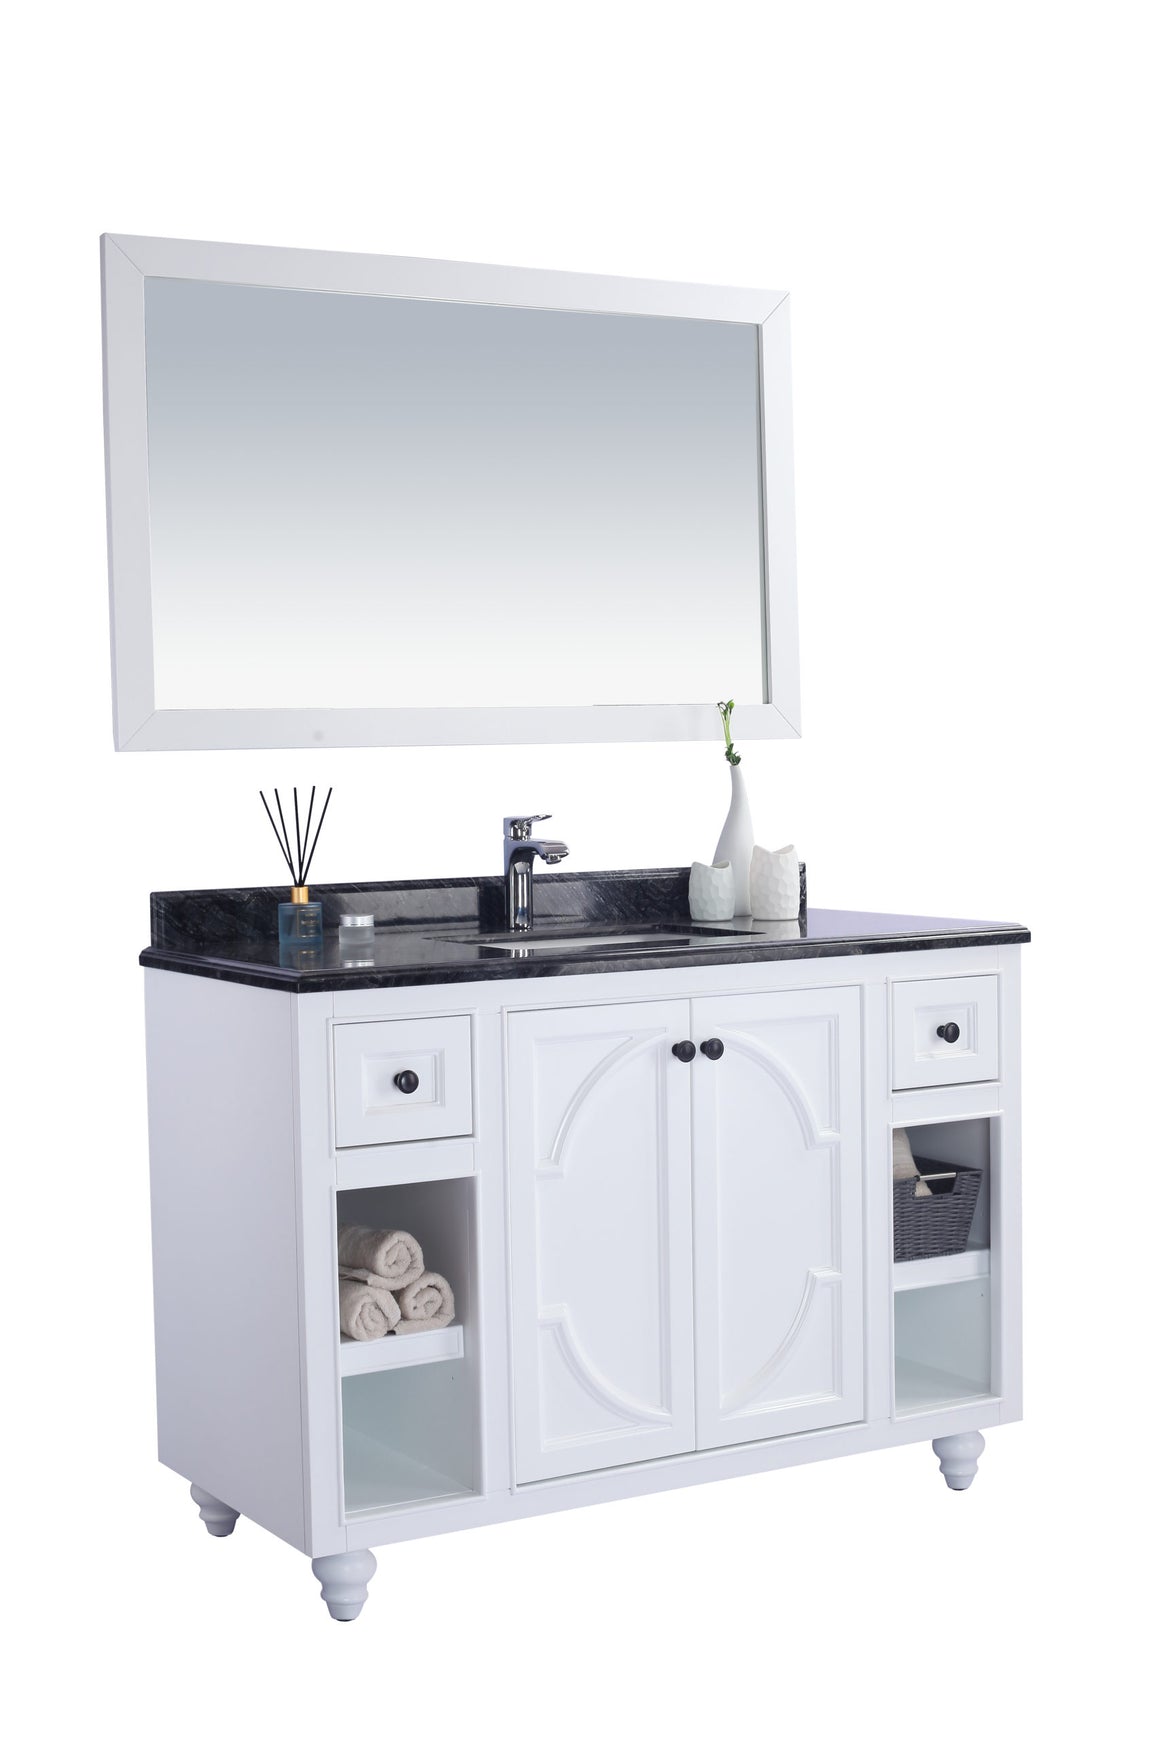 Odyssey - 48 - White Cabinet + Black Wood Marble Countertop